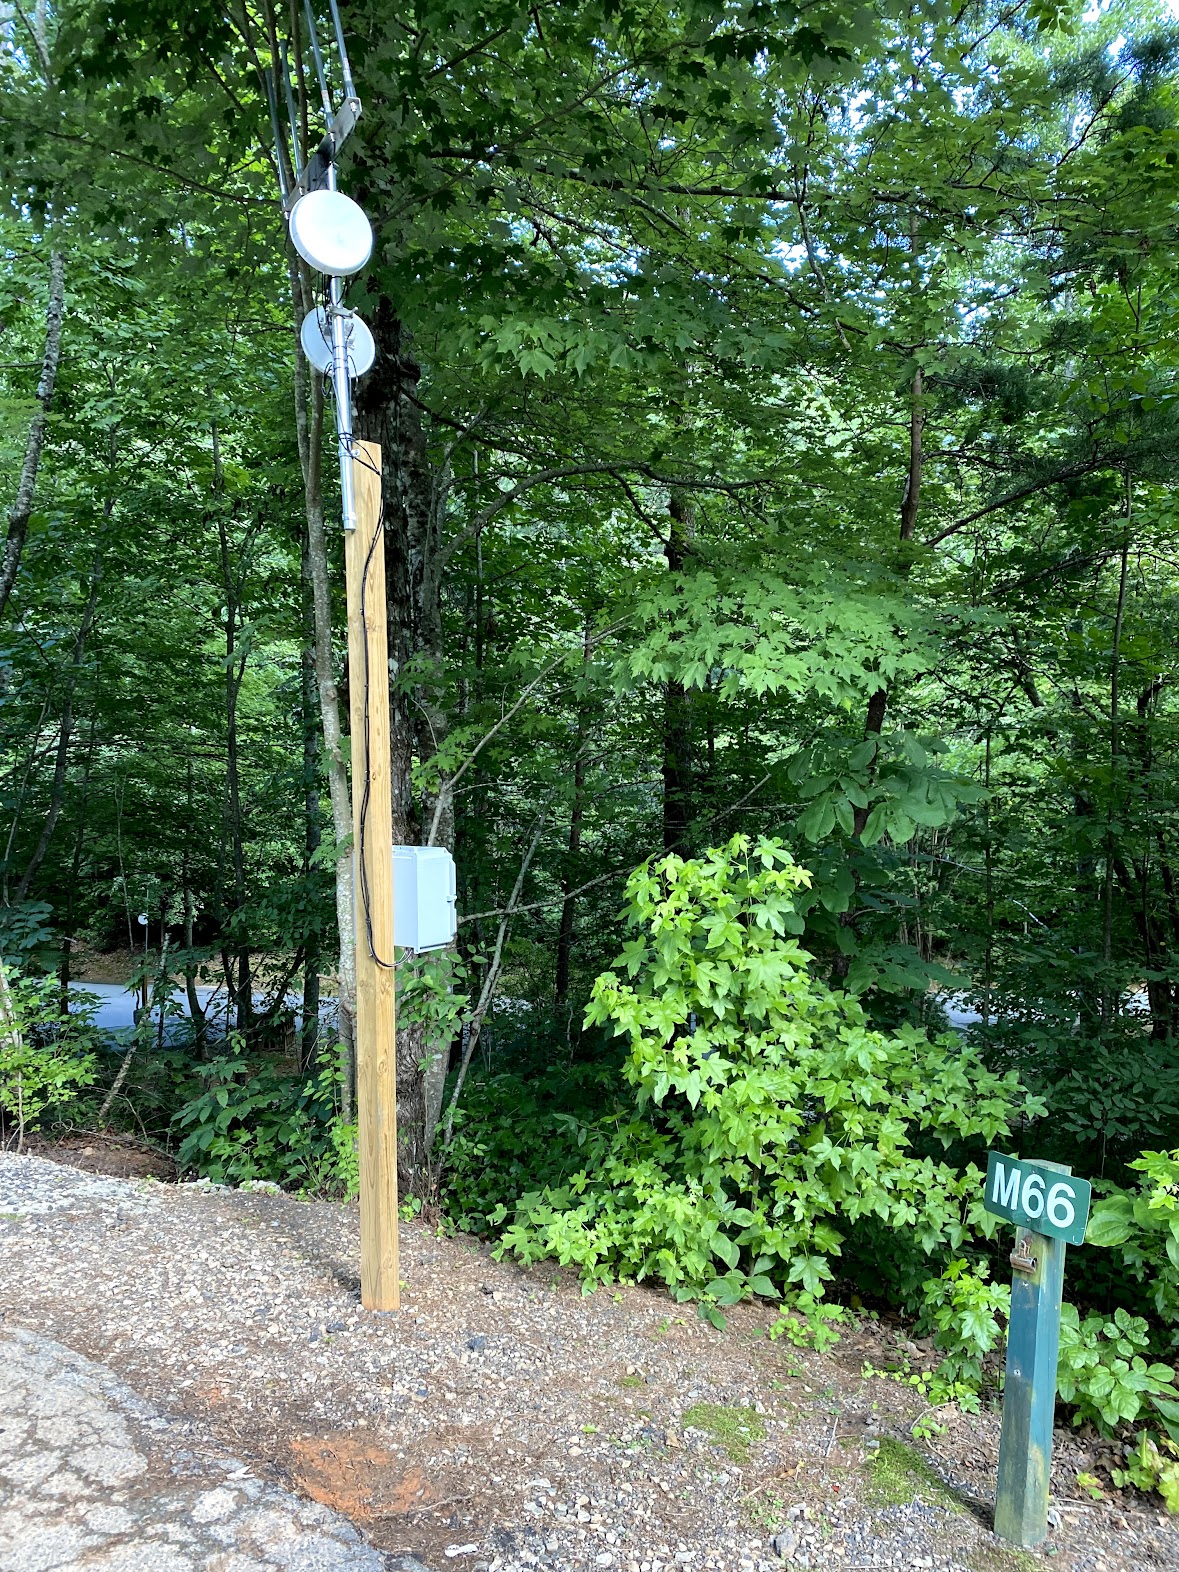 Internet Pole at campground